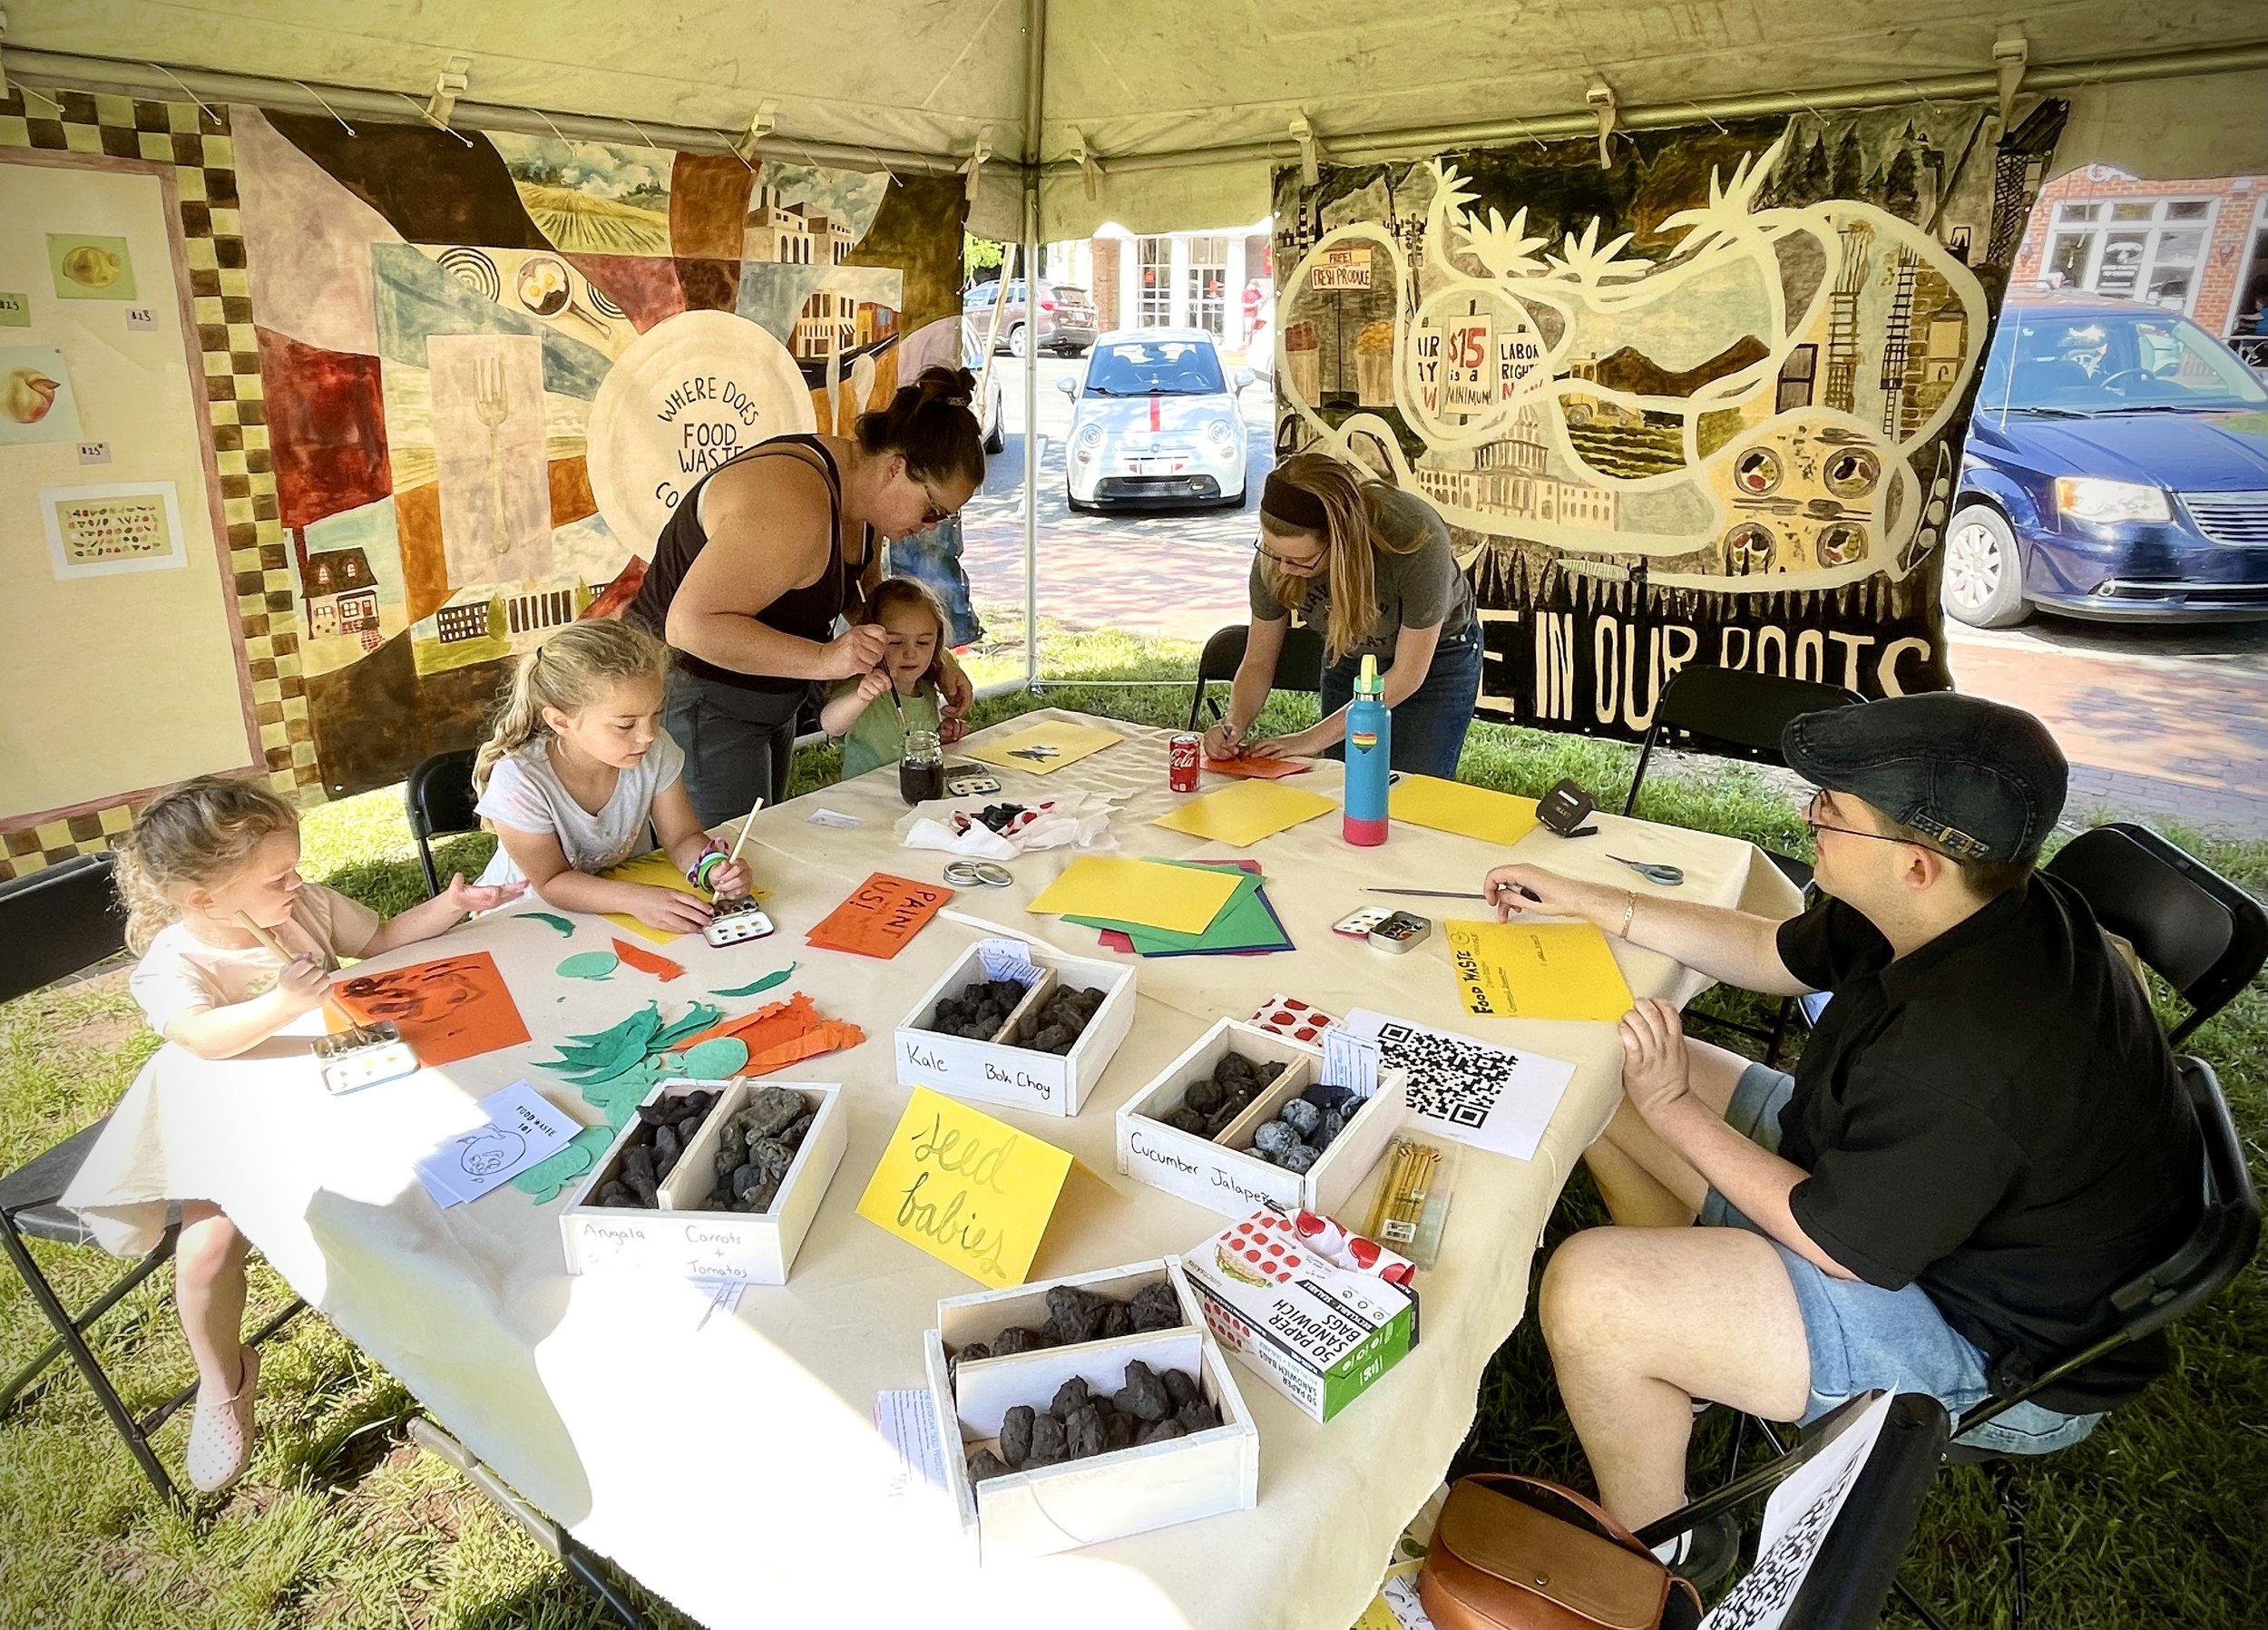  Students chose to focus on food security for their research, and created an immersive, interactive booth for the local art fair.  